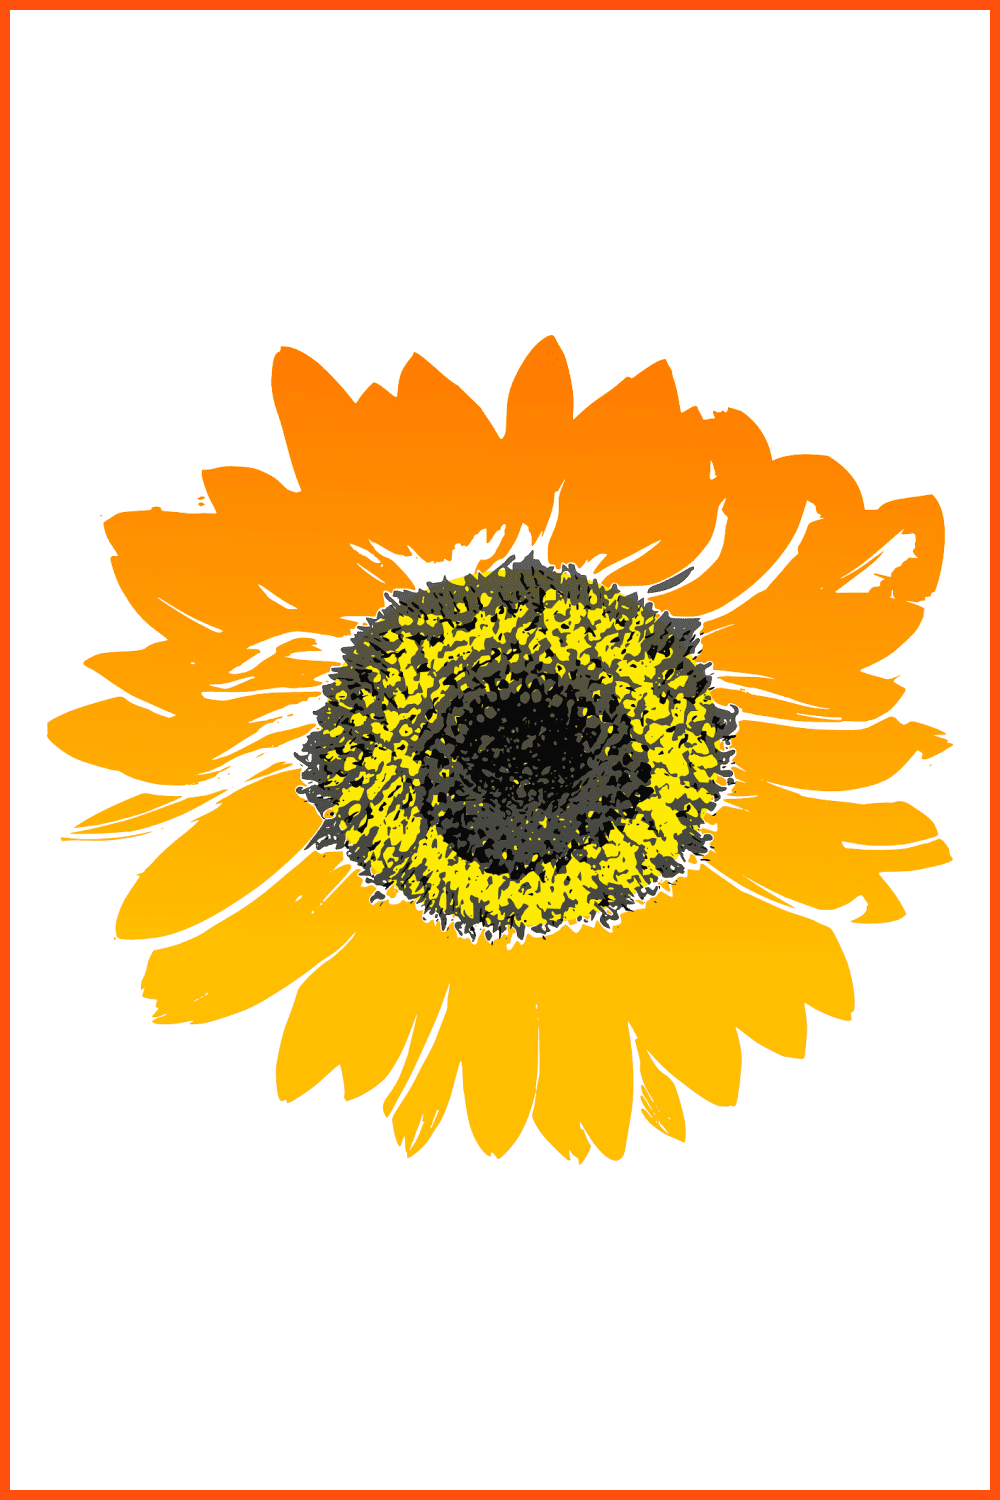 Sunflower Flower Yellow - Free vector graphic on Pixabay.